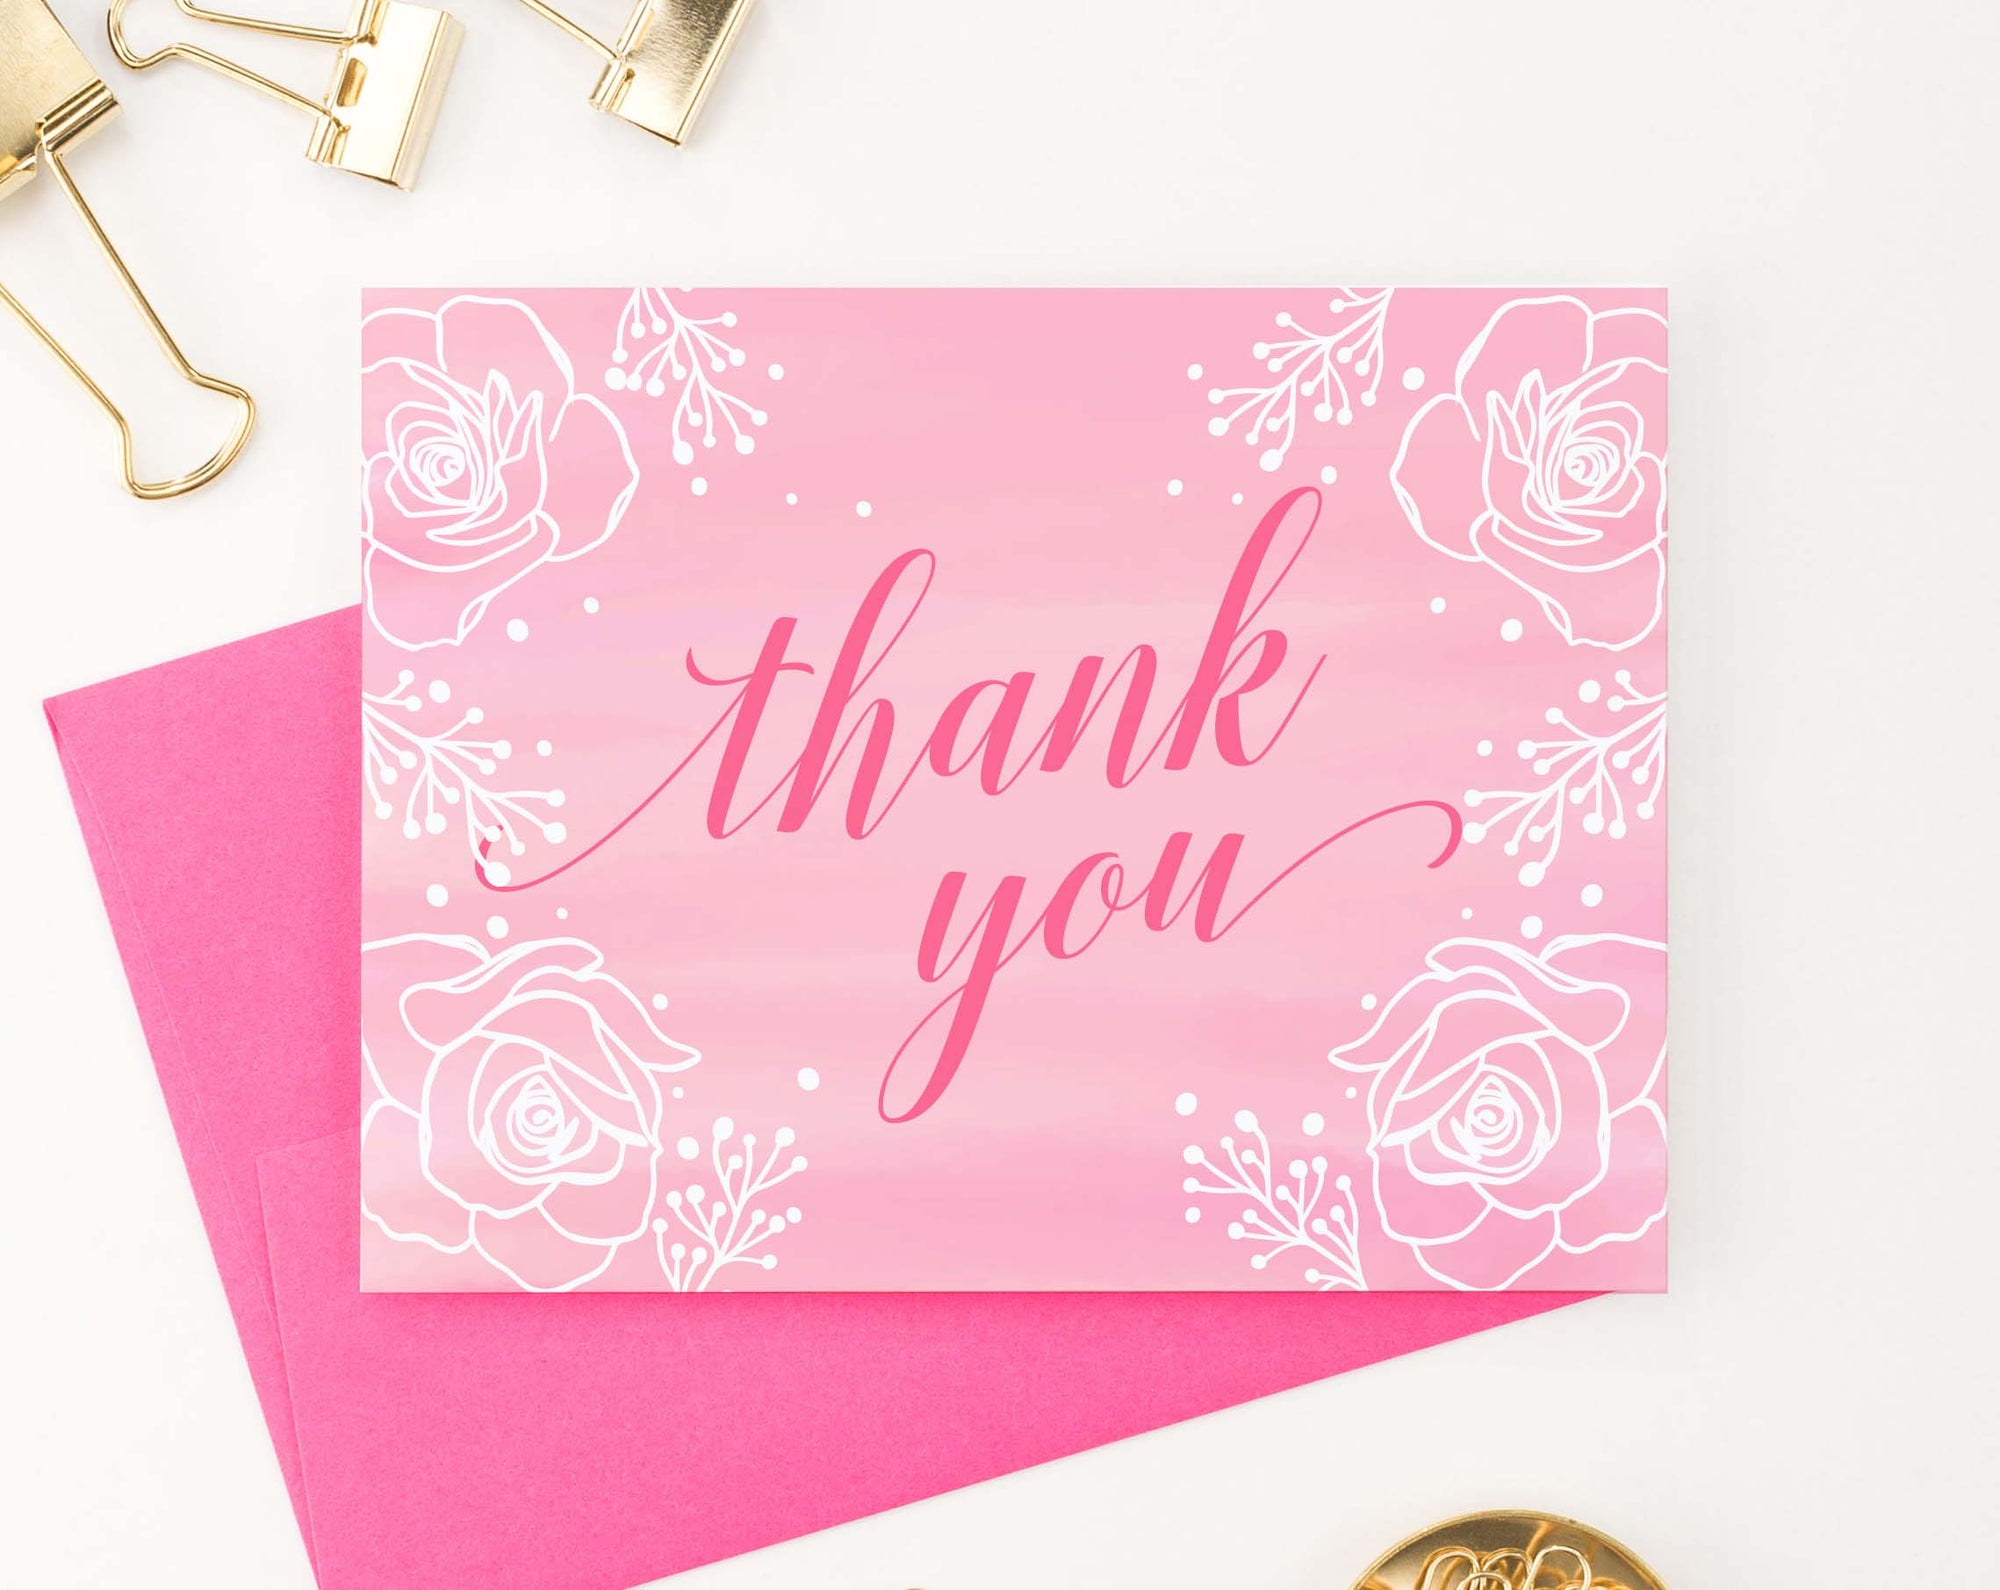 TY075 pink thank you cards with white florals cute elegant flowers thankyou